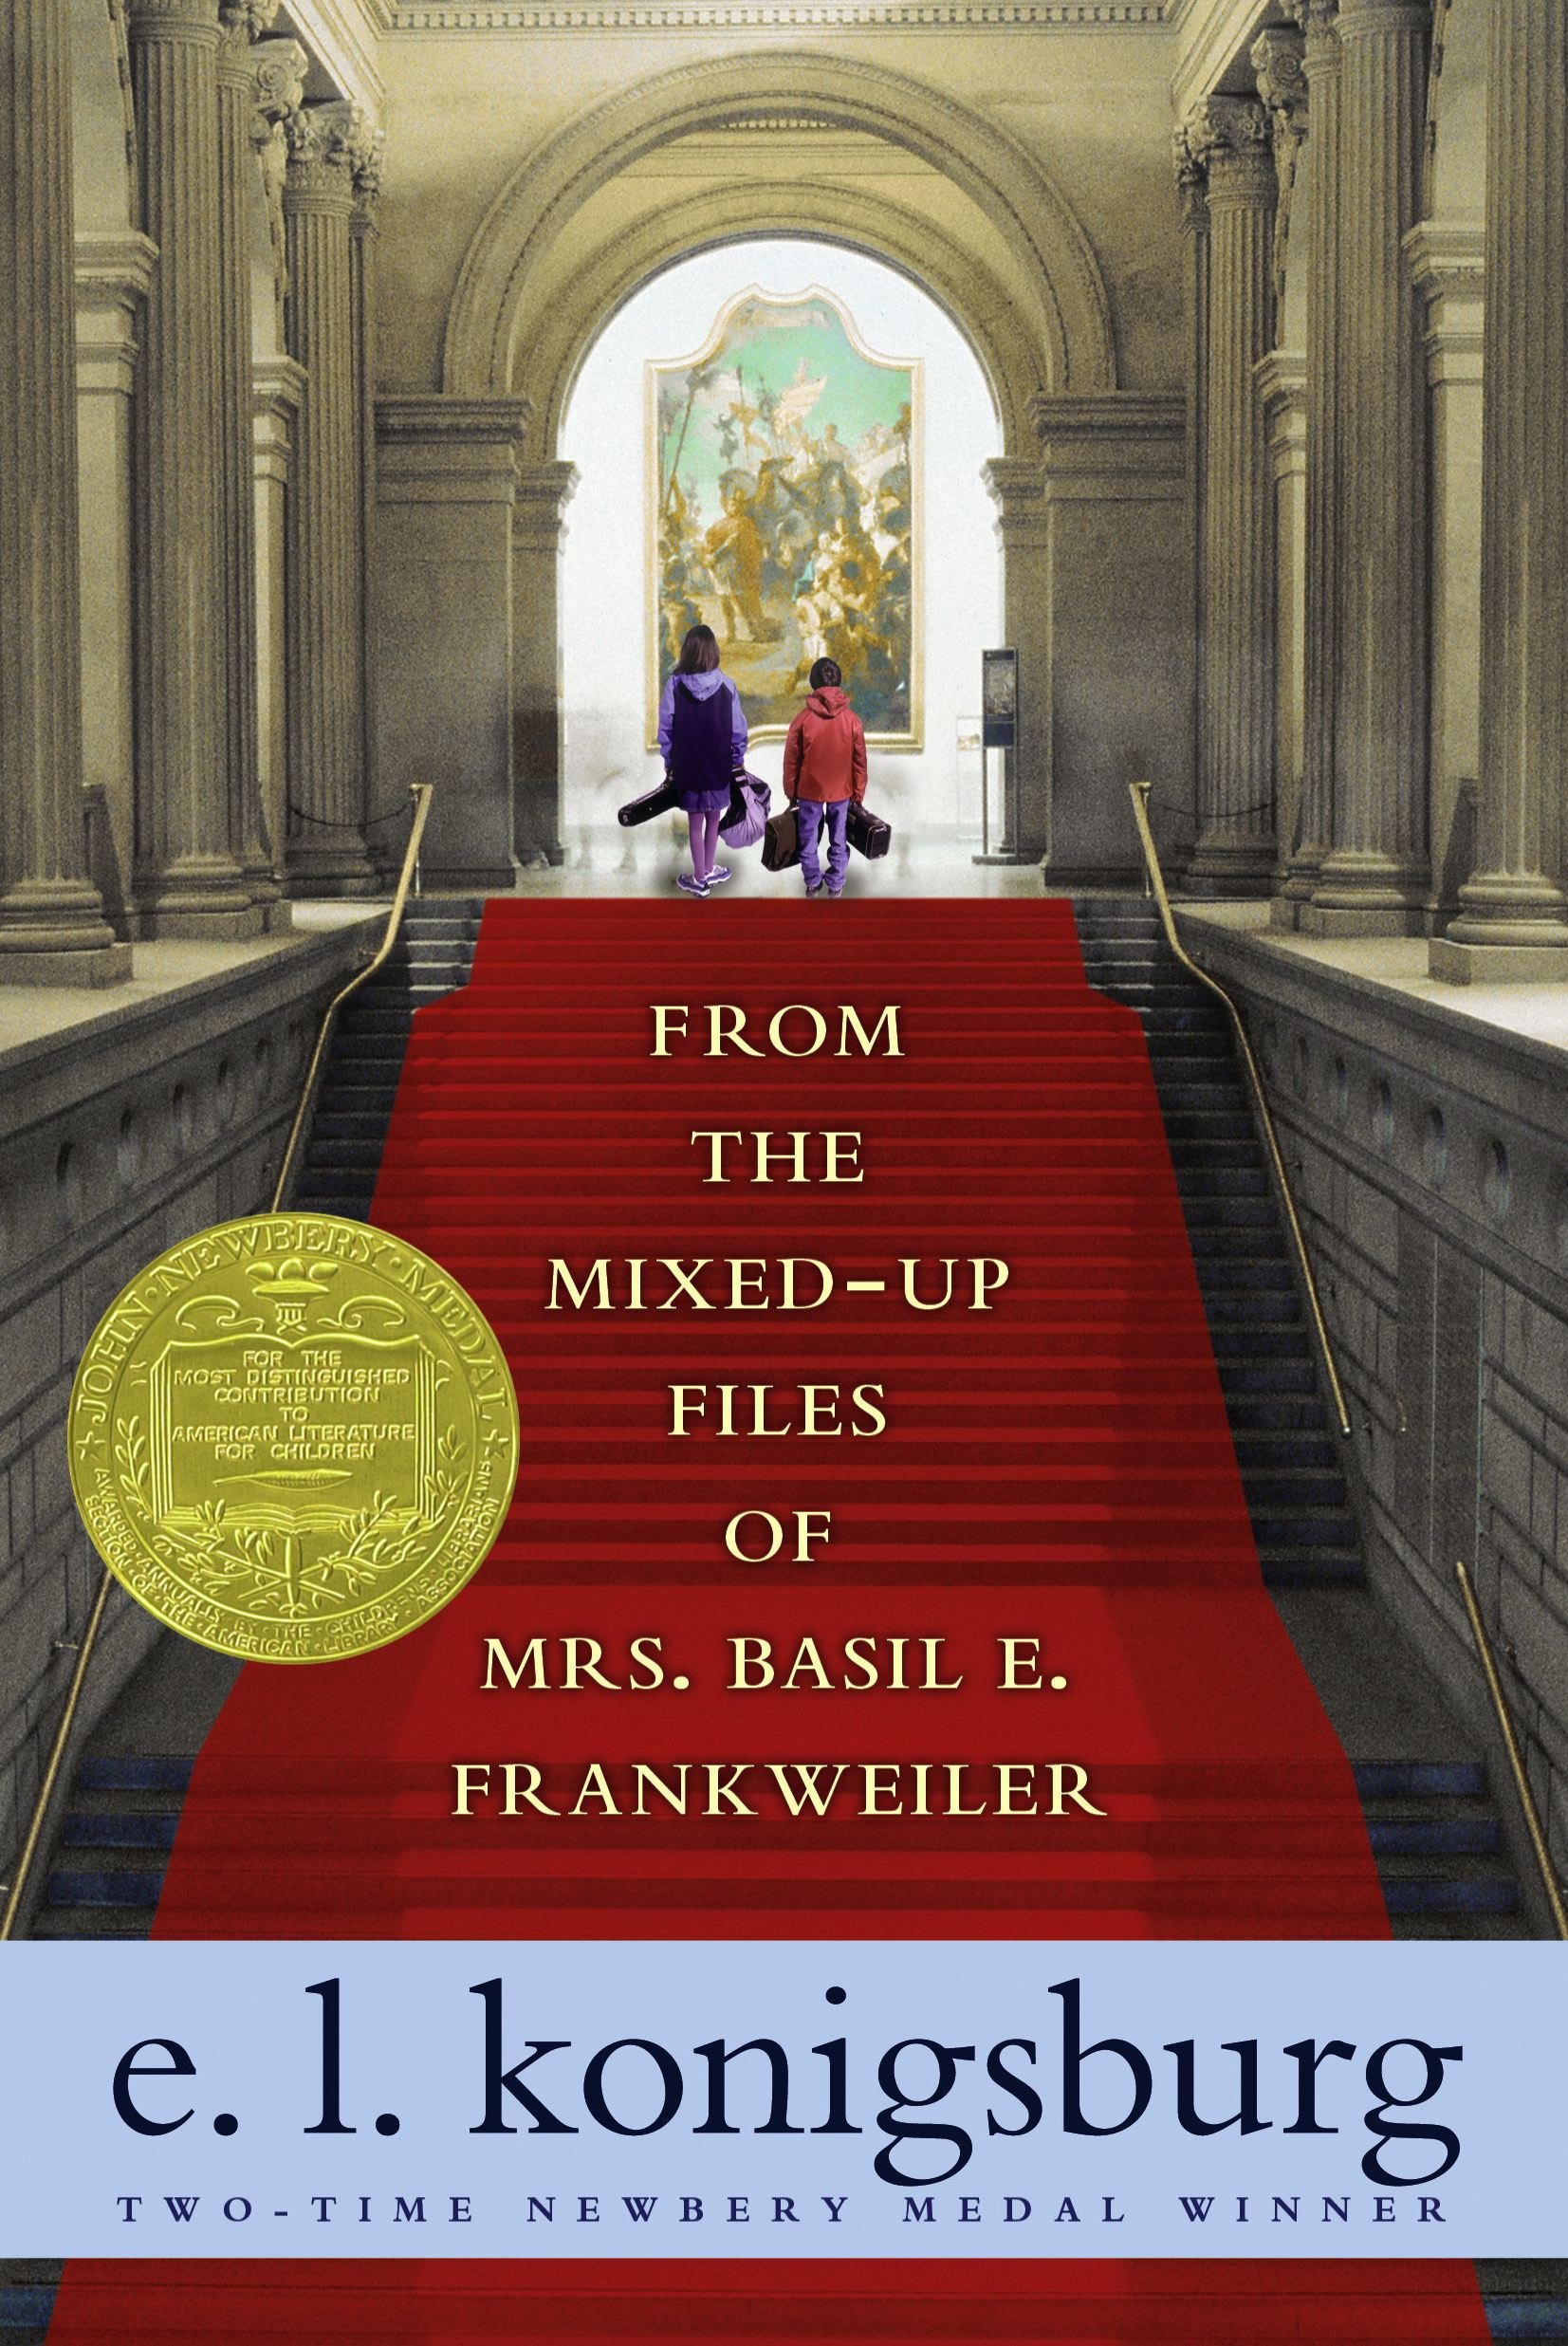 The Mixed Up Files of Mrs. Basil E. Frankweiler book cover